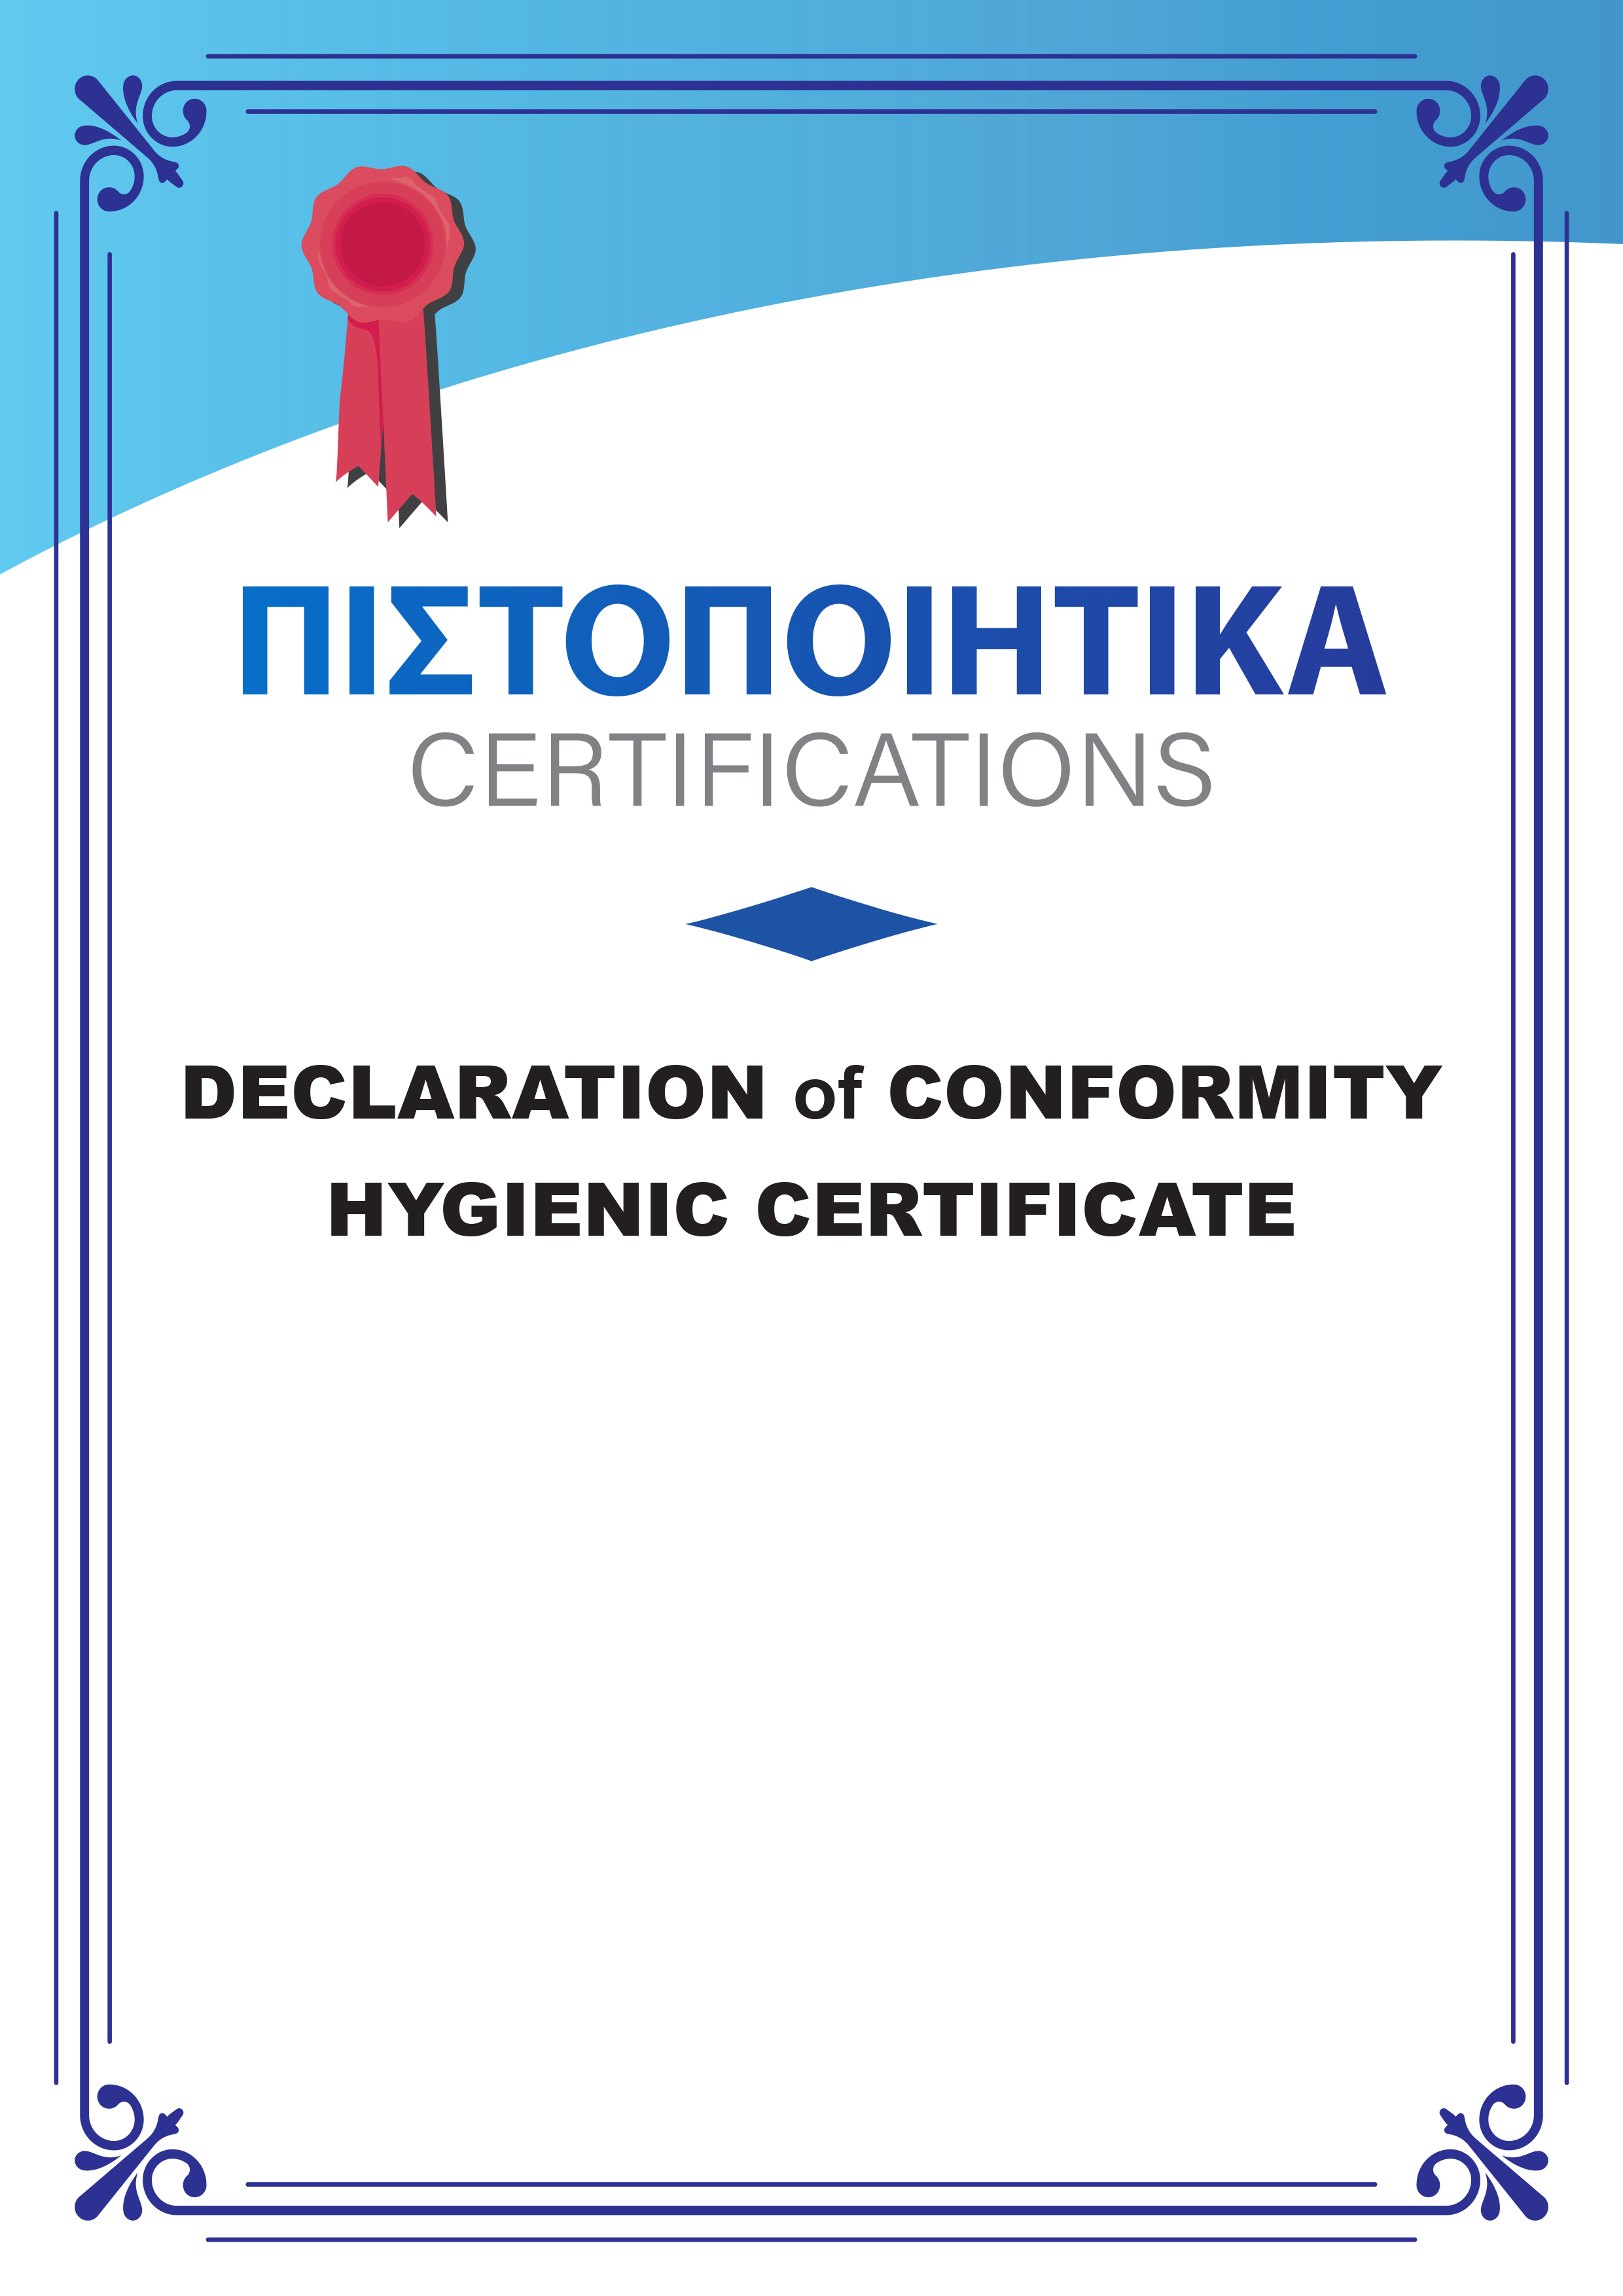 CERTIFICATES "WD"